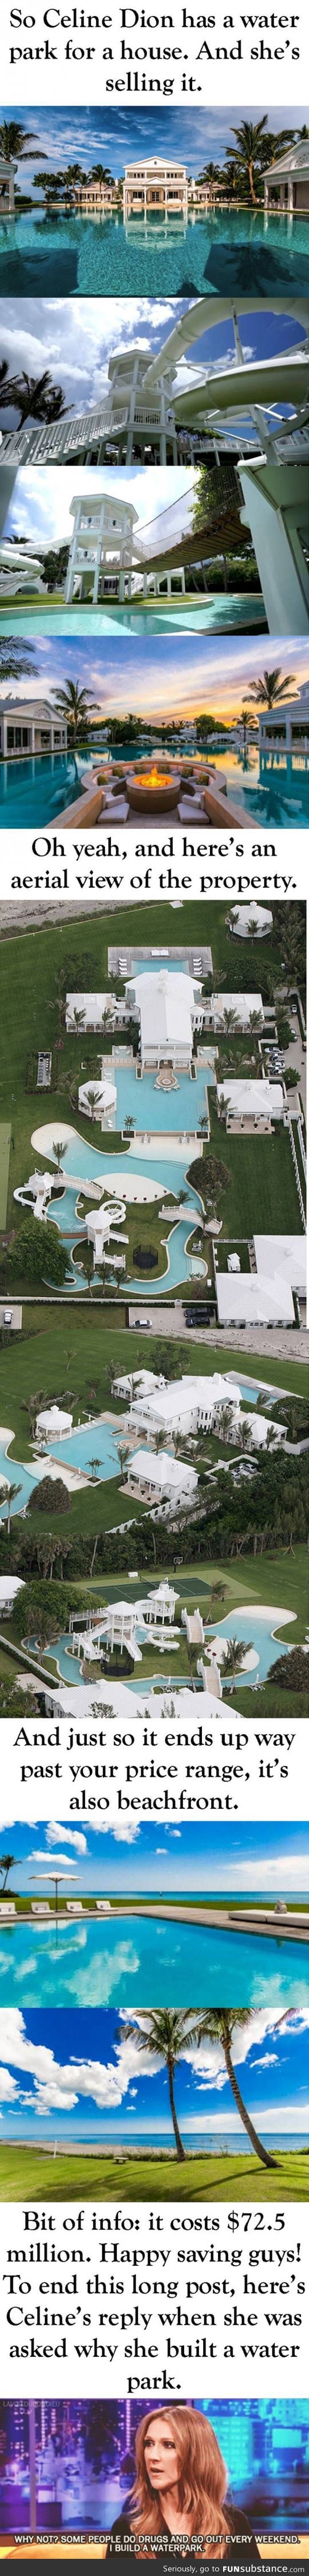 A look at Celine Dion's water park house